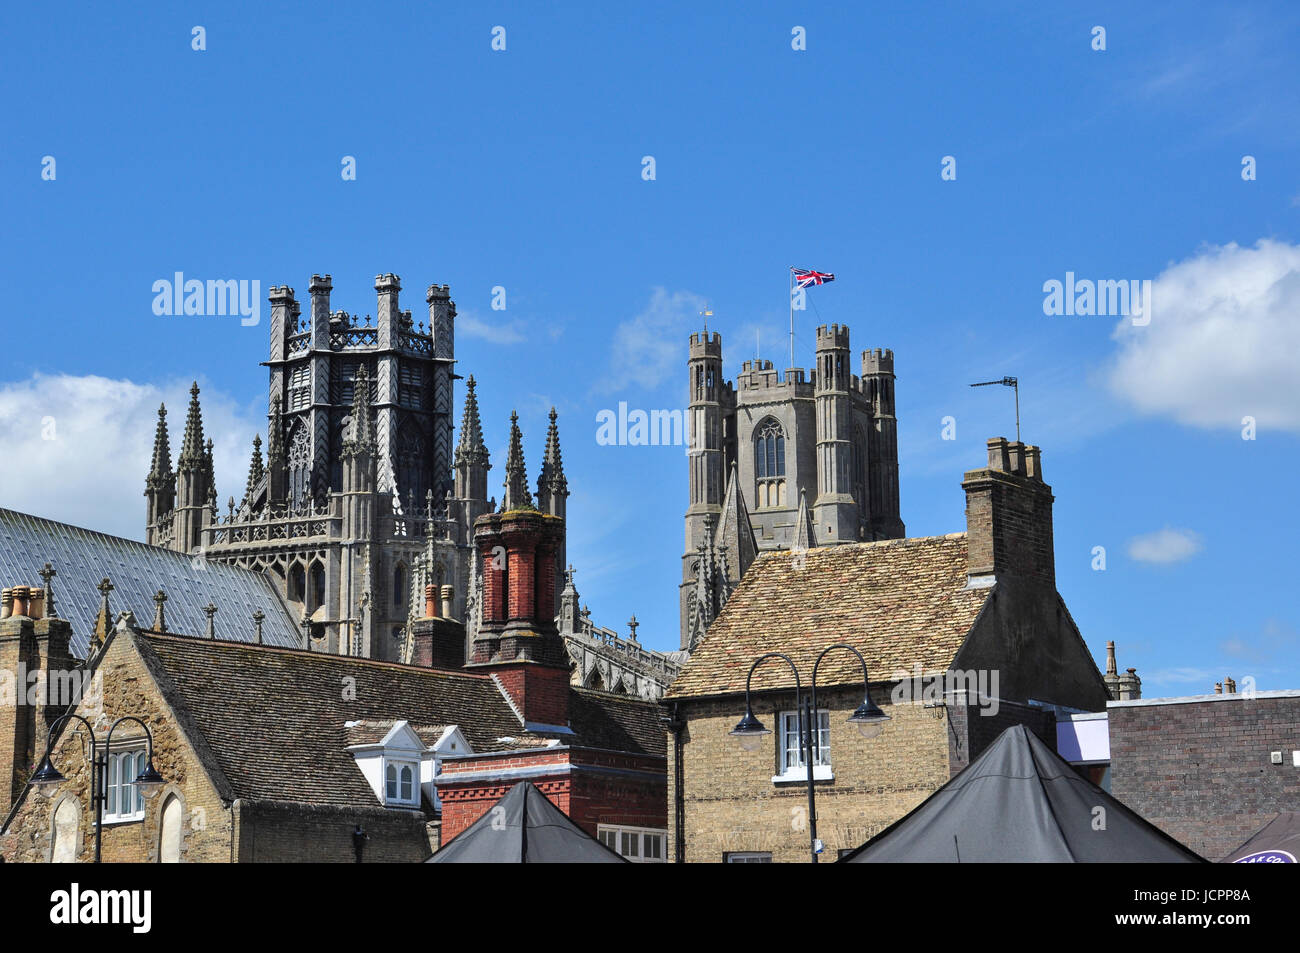 The towers of Ely Cathedral viewed from Market Place, Ely, Cambridgeshire, England, UK Stock Photo